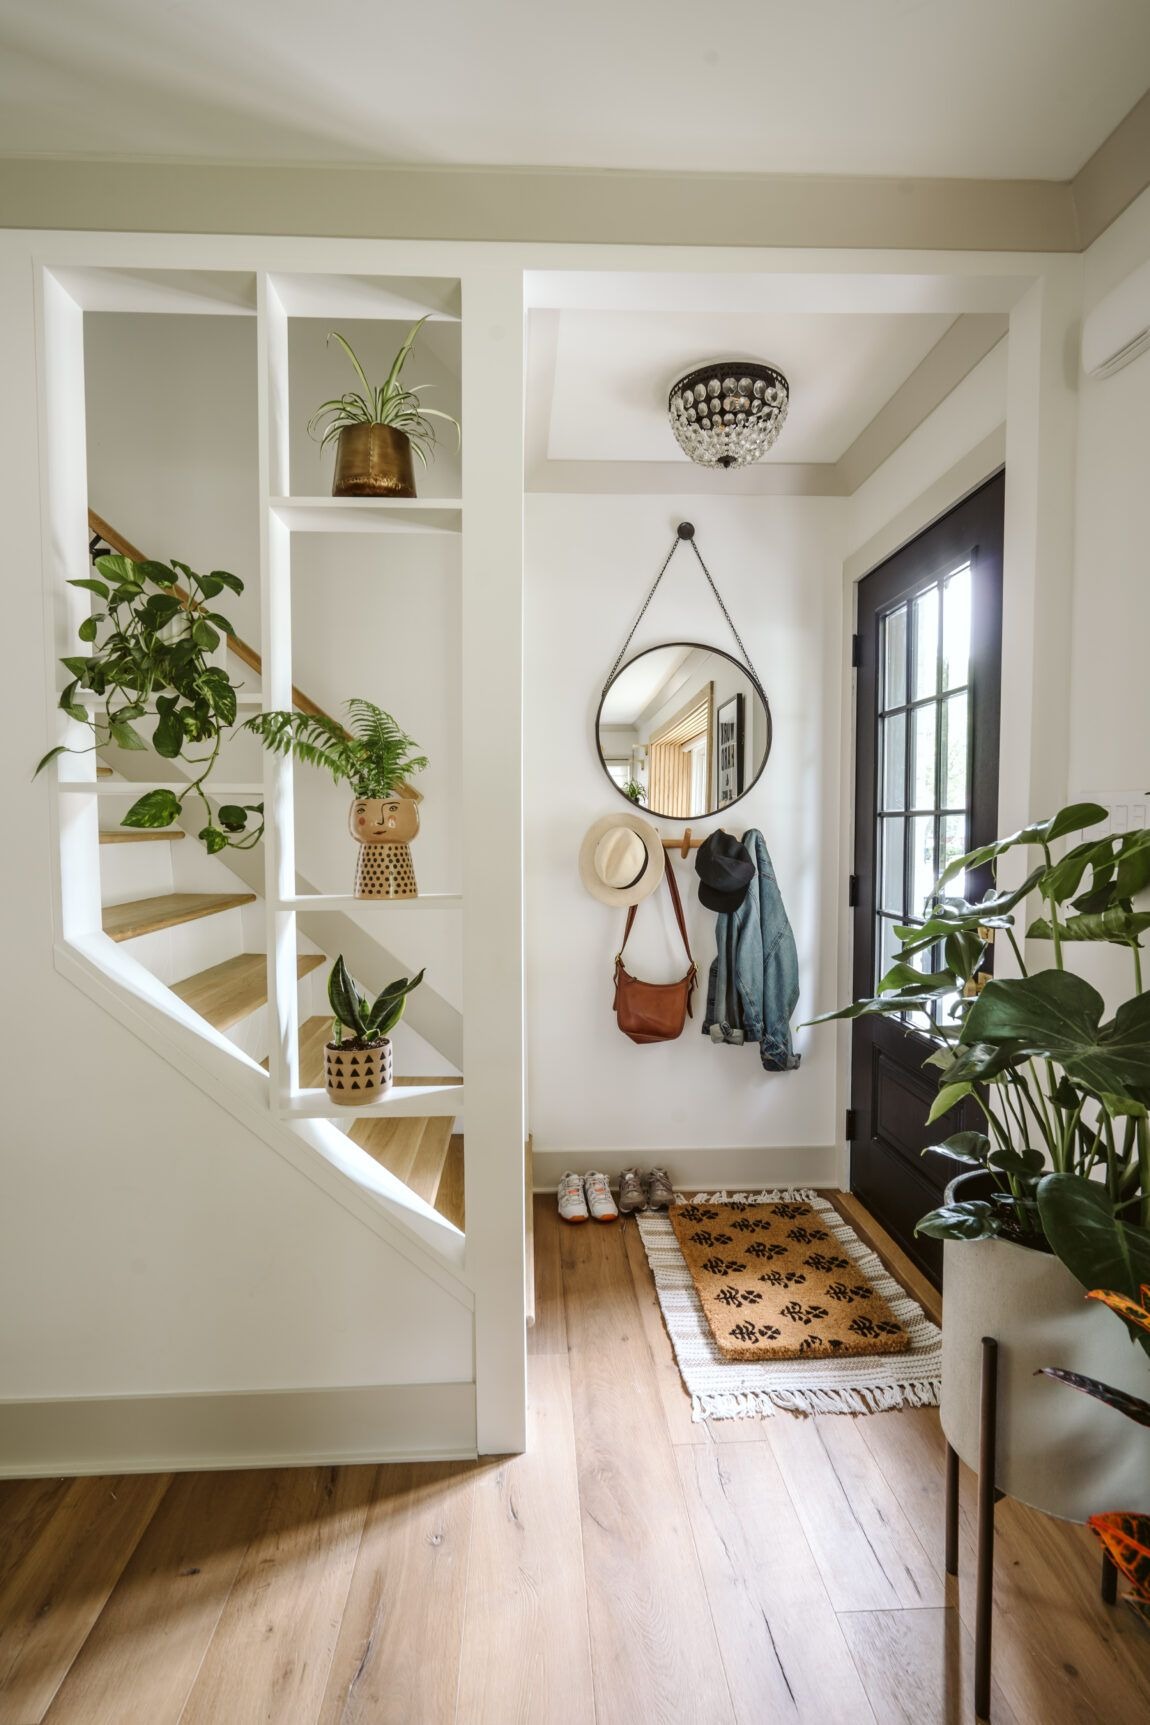 Staircase Landing with Entry Way Decor